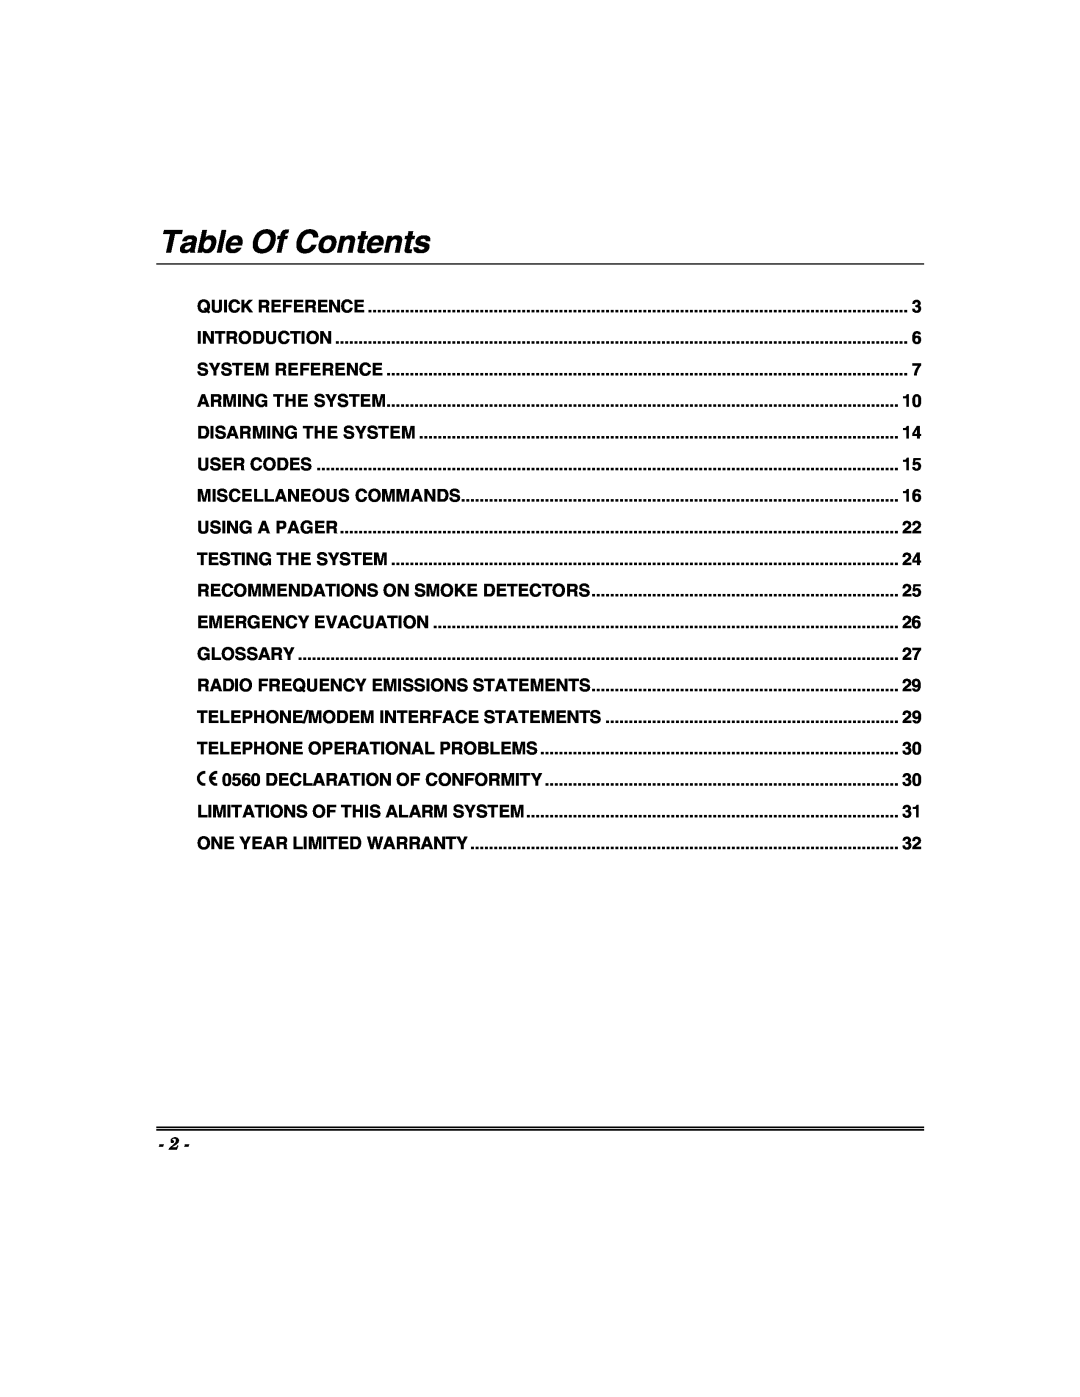 Honeywell 624, 400, 600, 848 manual Table Of Contents 